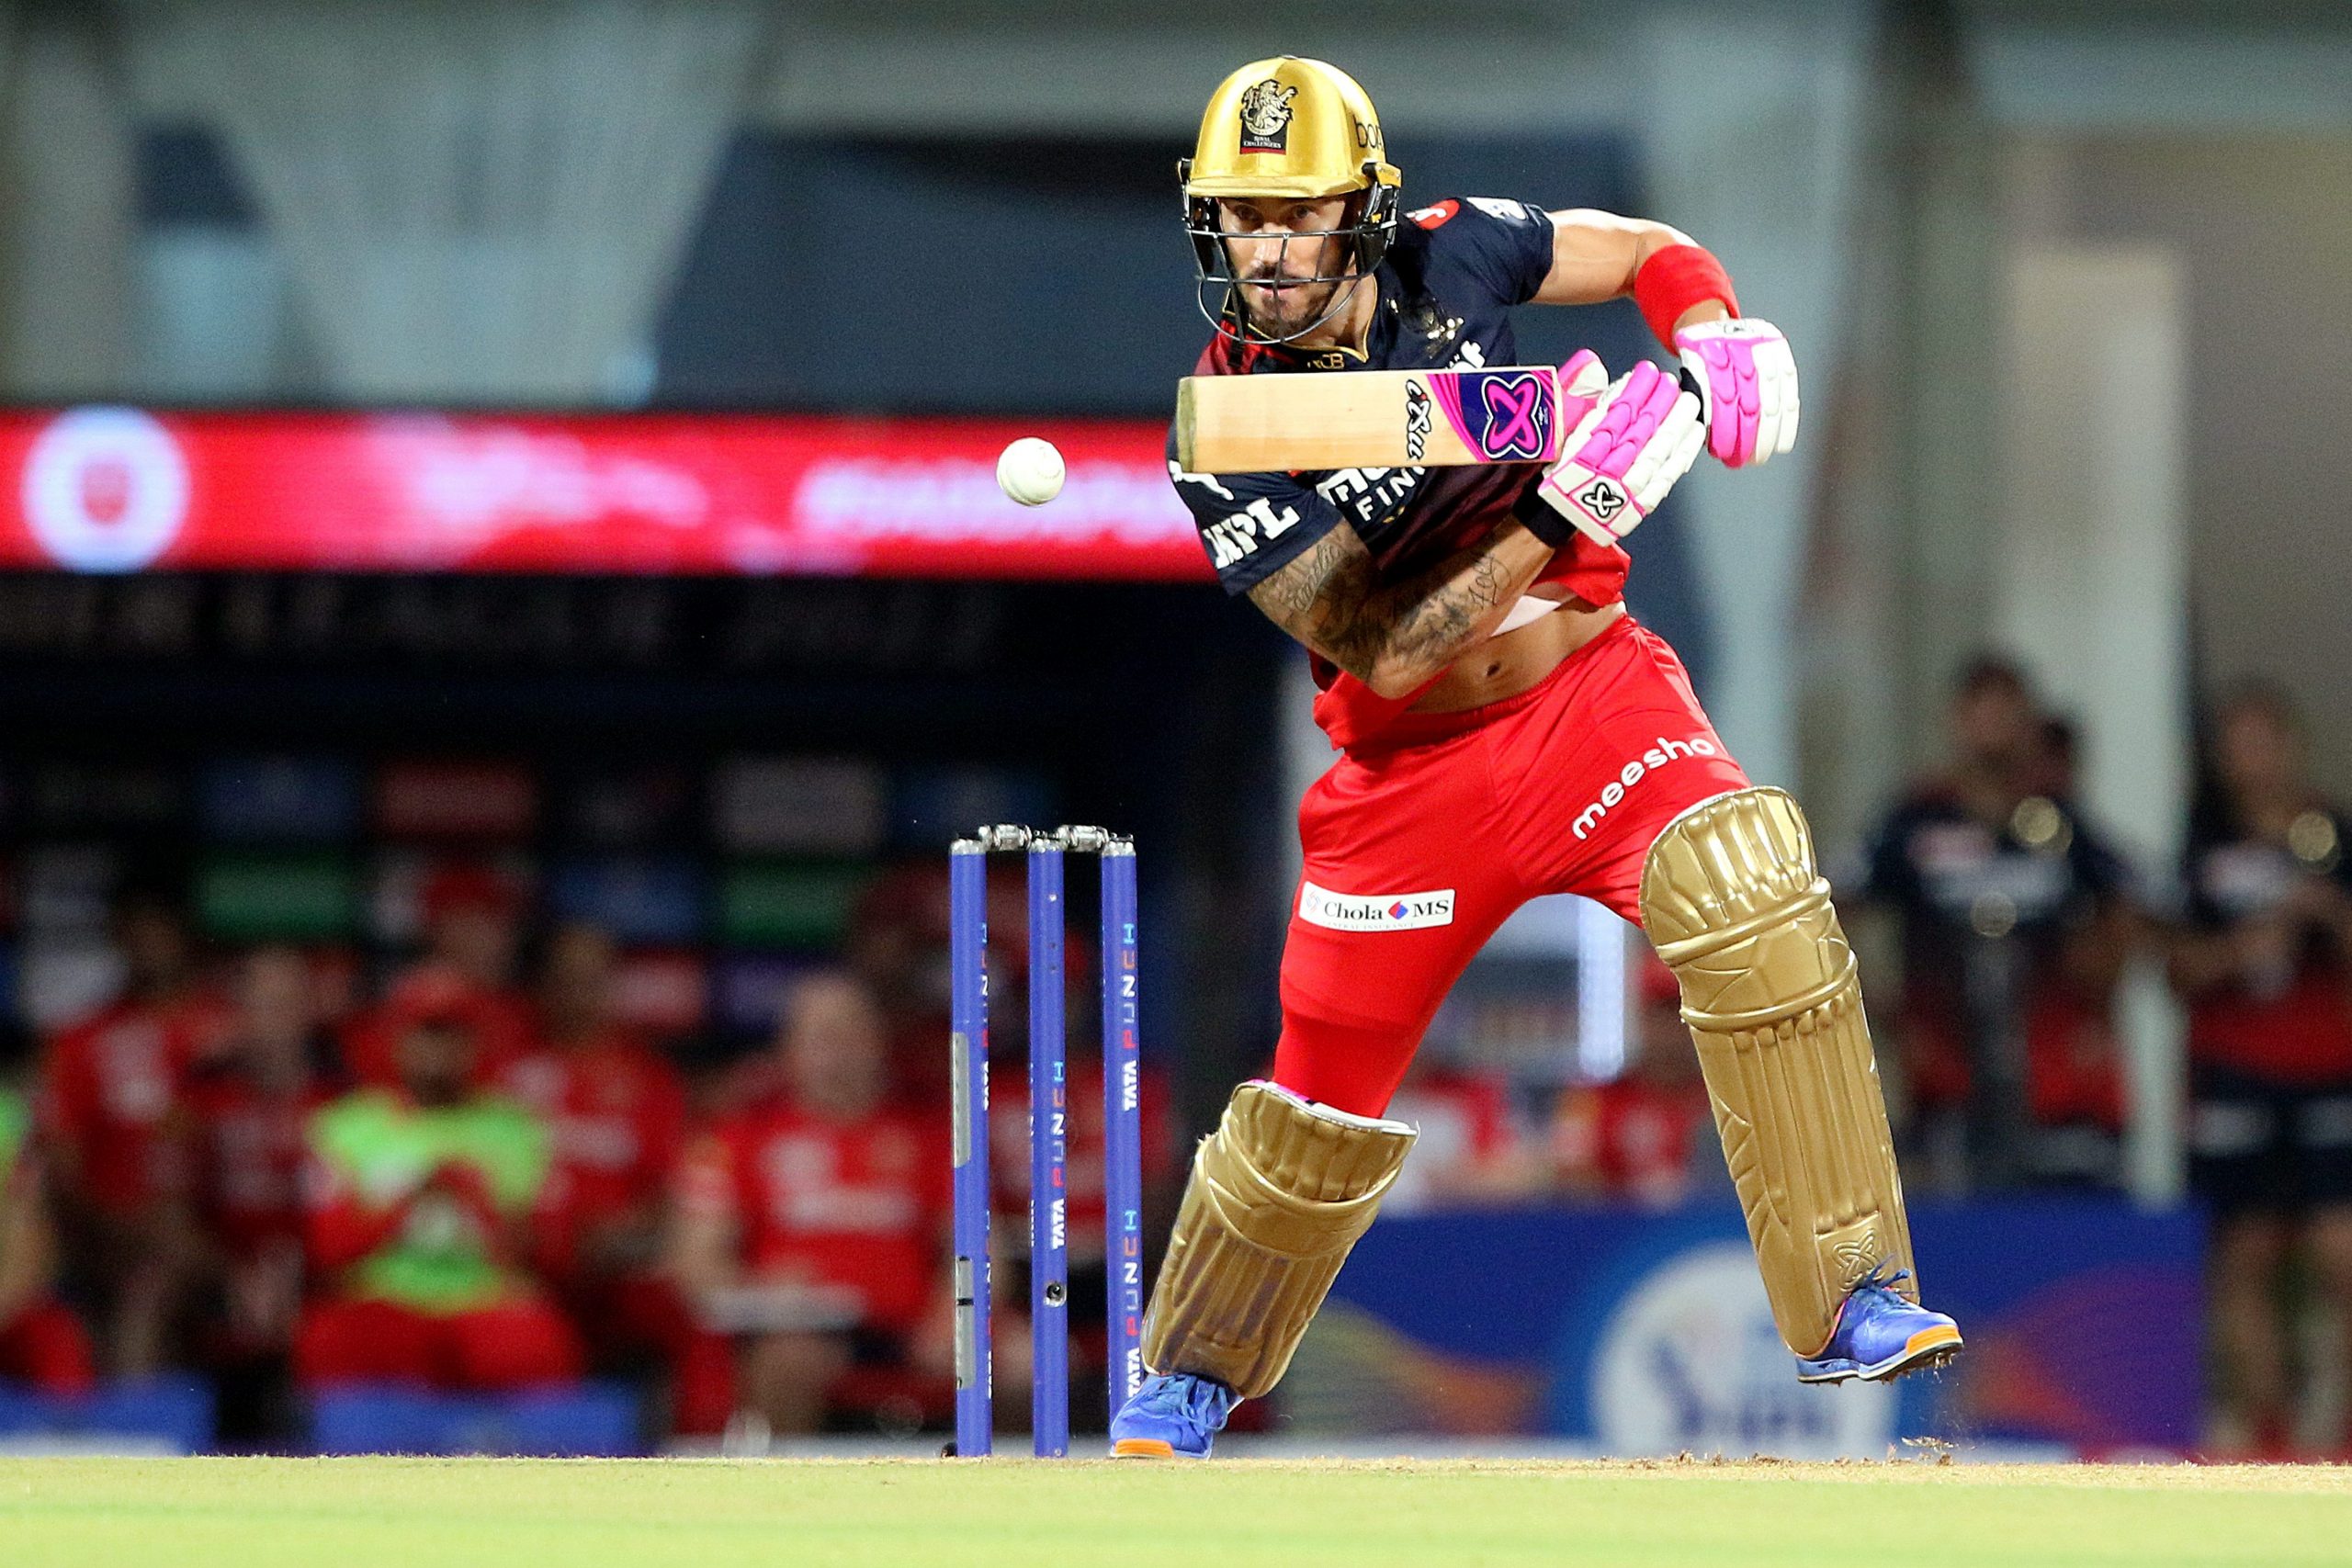 IPL 2022: When and where to watch Royal Challengers Bangalore vs Punjab Kings, live streaming?